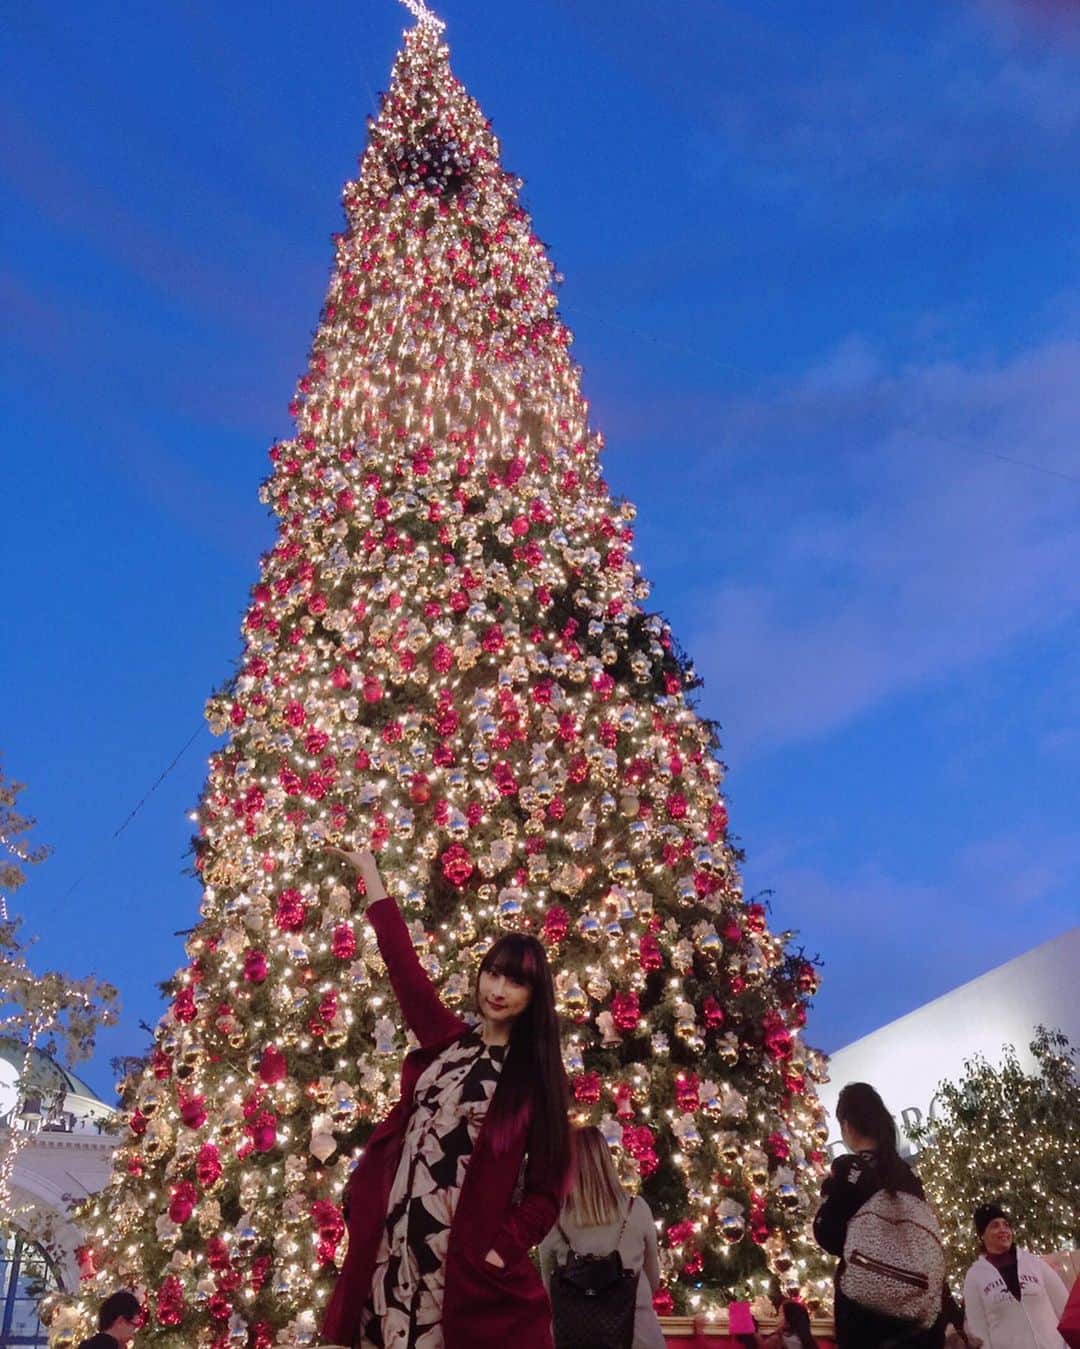 RinRinさんのインスタグラム写真 - (RinRinInstagram)「Forgive the obvious throwback! I’ve been traveling nonstop since November, so I really need to catch up with my posts💦 I want to show all the different Christmases I had in different countries~🎄✨ . . First up, United States🇺🇸! Specifically, Los Angeles, California🕶the weather was so warm it’s hard to believe it’s actually winter😂 I met up with my amazing jiejie @glowyangpr who I haven’t seen in forever 😘💕 at LA’s The Grove✨ I haven’t been there in years and she converted me from a cronut-lover to a DKA-lover (which do you like???🍩✨) . . I also bought my first ugly sweater with @hollylollipoppins (📸 by @jazharold ) during our desert adventures 😂😂😂 more photos on that to come 😬 . . クリスマスの写真すごい遅くなってしまってごめんなさい！！！11月からずっと色々海外の出張と旅行だったから、写真全然追いつかなかった🙇🏻‍♀️でもいろんな国のクリスマス経験してきたからちょっと見せたいなと思って、許してくださいー！ . . まずアメリカ🇺🇸！実家のロスに帰ってて、やっぱり天気暖かすぎて、全然冬って感じしない〜ここはロサンゼルスのザグローブのとこ〜お姉さんの存在のような @glowyangpr と久しぶりに行って、懐かしい〜♪ . . そして初めて購入したugly sweater❄️! やっぱりクリスマスの必要品😂😂😂 . . . #rinrindoll #christmas #thegrove #thegrovela #glowyangpr #ロス #ロサンゼルス #uglysweater #losangeles #ootd #今日のコーデ #旅行 #ファッション #冬 #おしゃれ #コーデ #ヘアアレンジ #アメリカ #クリスマス #アグリーセーター #japanesefashion #tokyofashion #harajukufashion #winterootd #winter」1月28日 16時02分 - rinrindoll